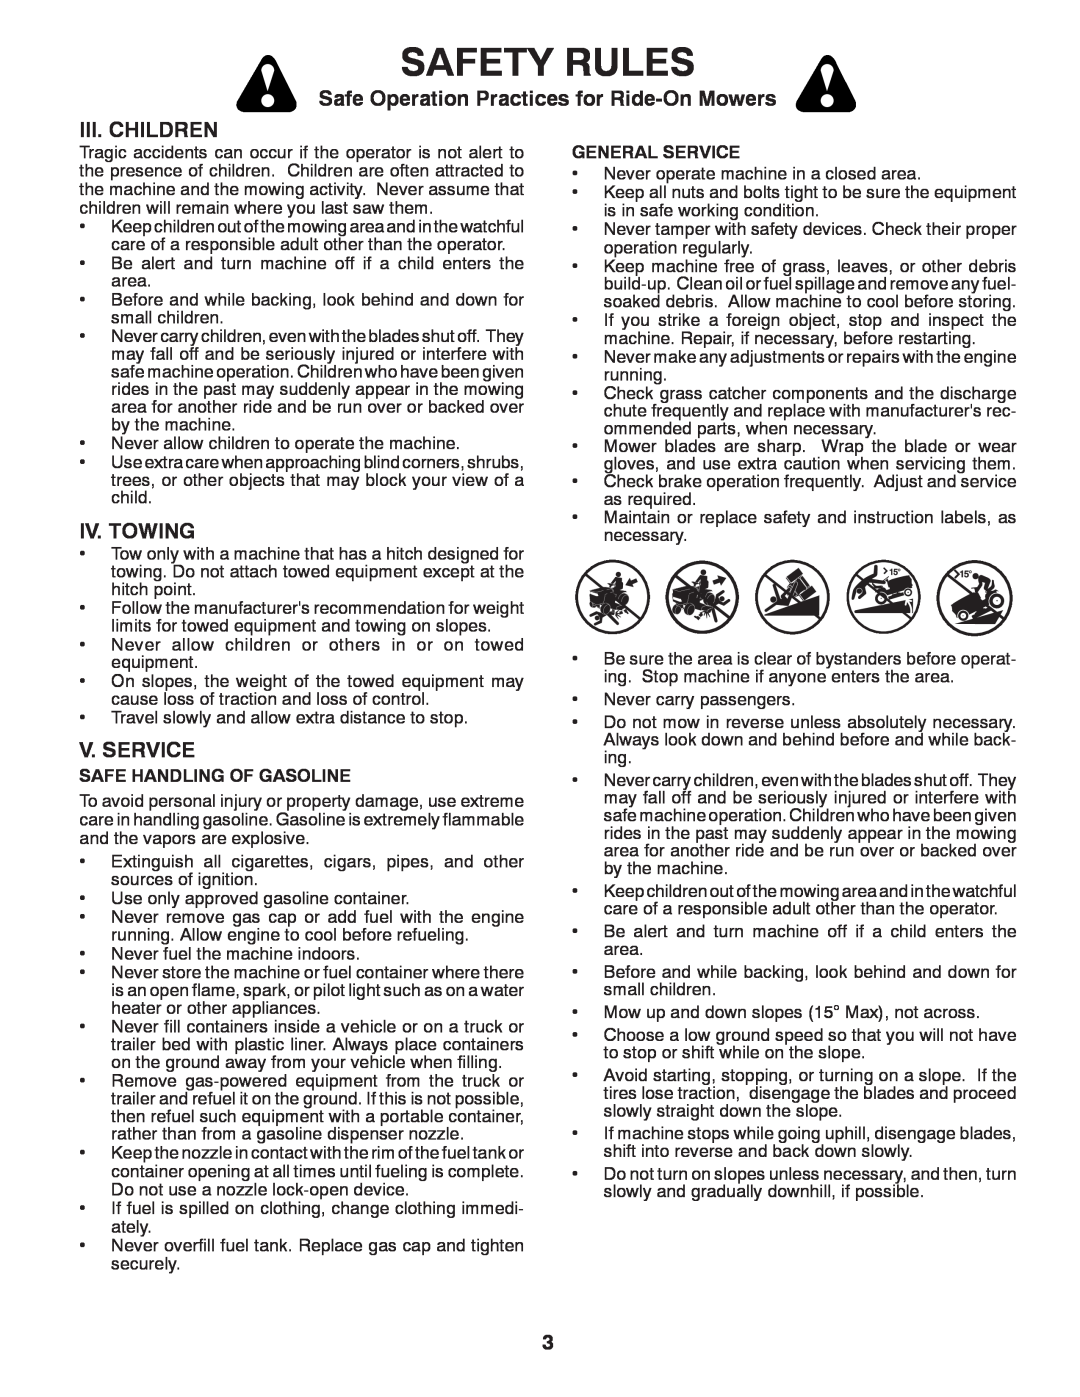 Poulan 96042012400 manual Iii. Children, Iv. Towing, V. Service, Safety Rules, Safe Operation Practices for Ride-On Mowers 